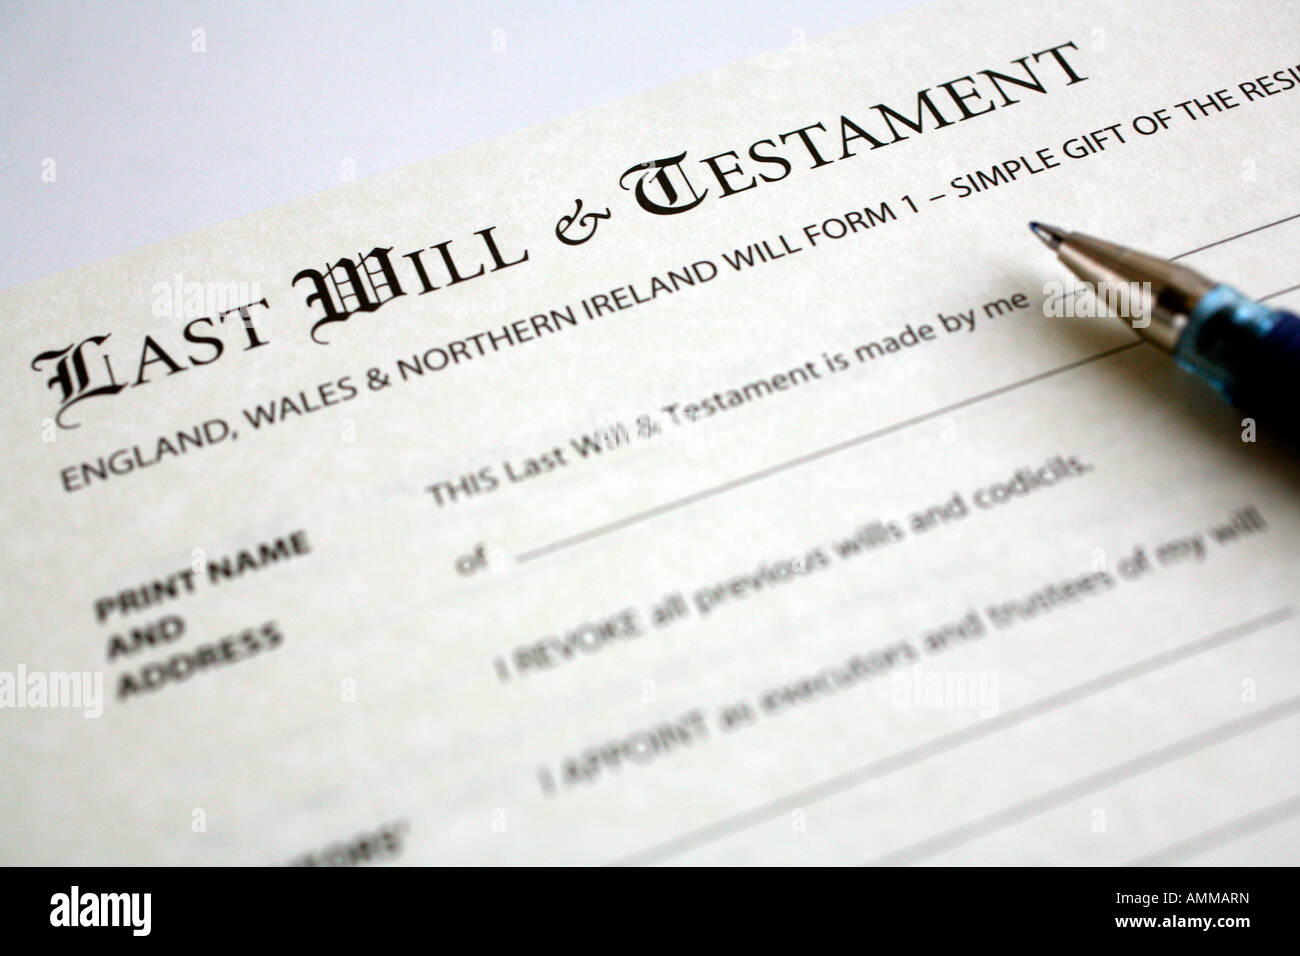 Last Will and Testament Stock Photo